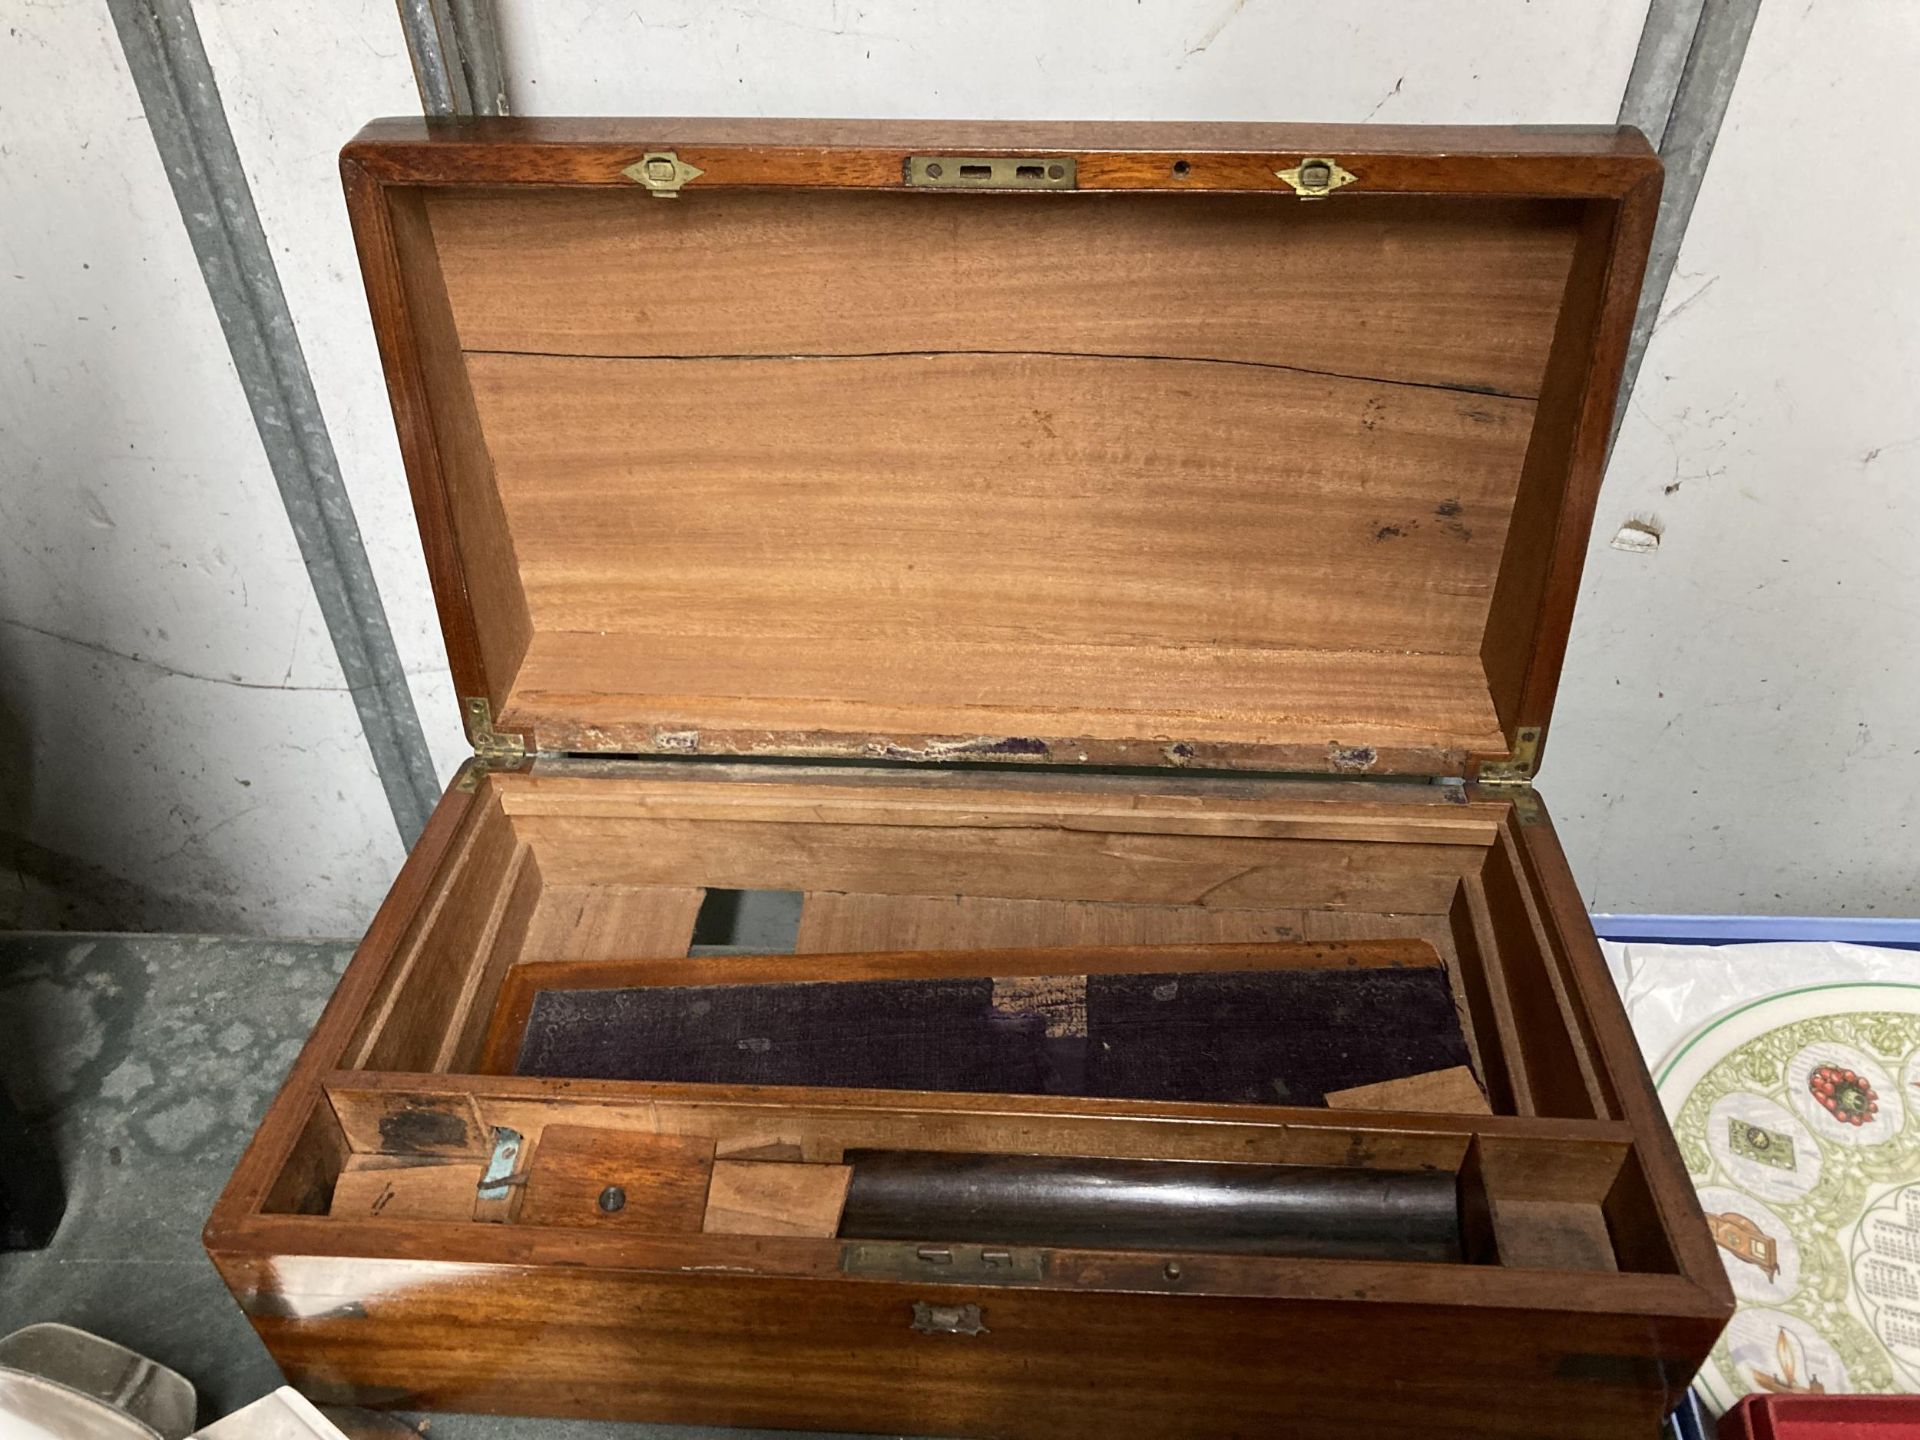 A MAHOGANY WRITING SLOPE WITH BRASS CORNERS AND ESCUTCHEON - IN NEED OF RESTORATION - Image 2 of 3